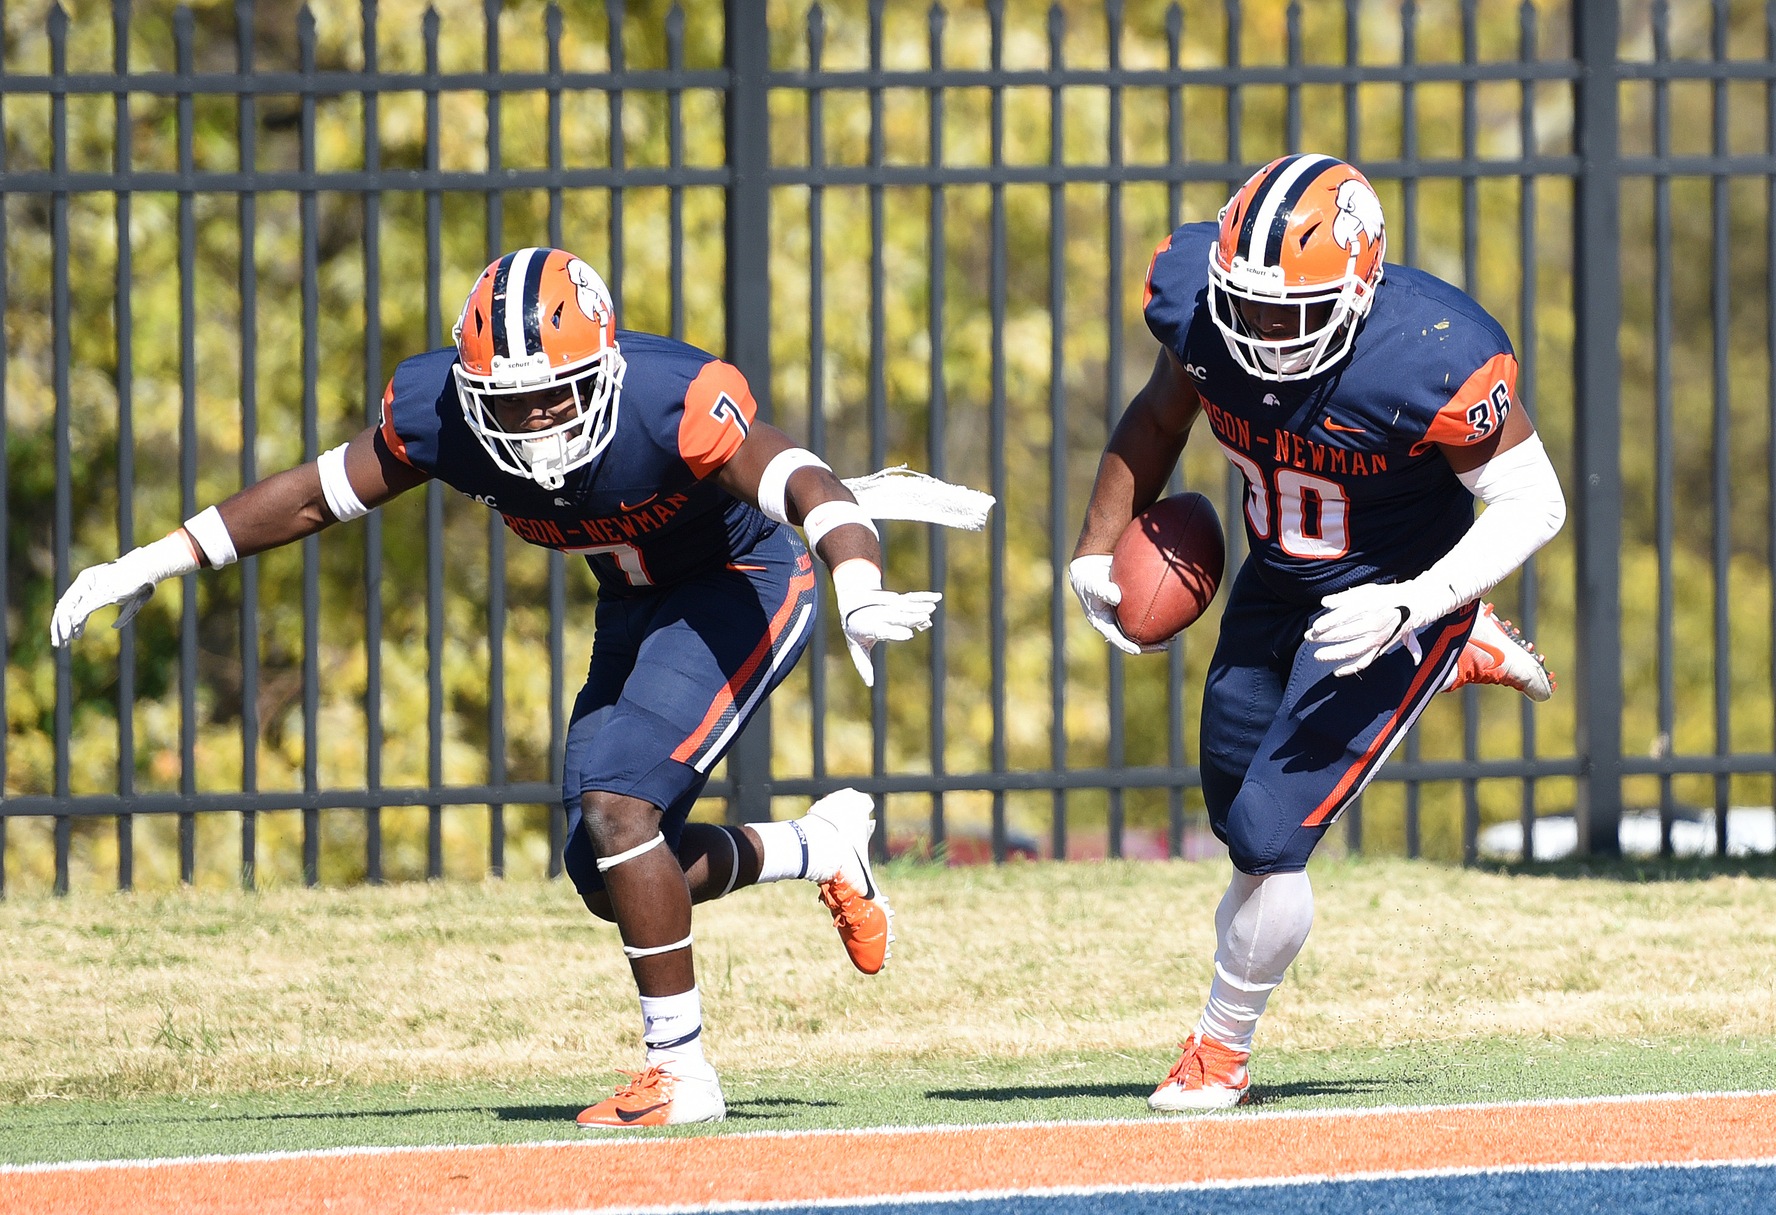 Carson-Newman angles to close regular season on a high note at UNC Pembroke